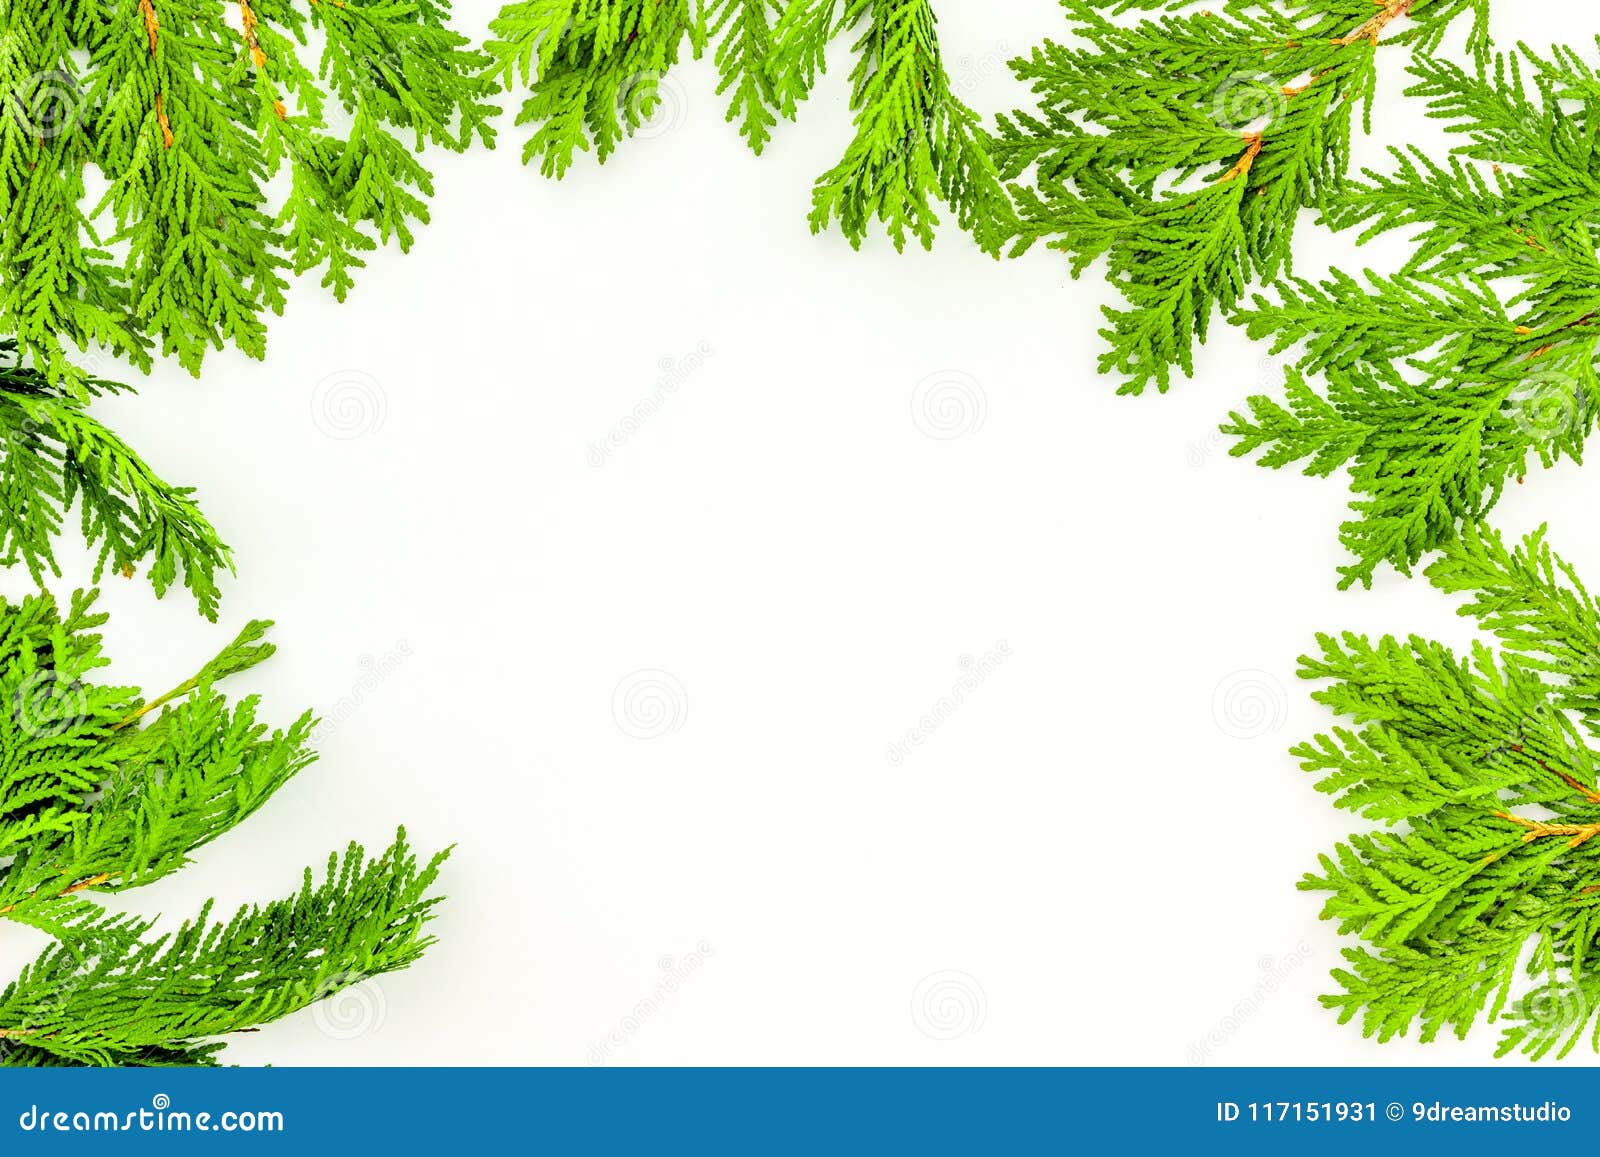 Frame or Background with Juniper for Image Editing, Image Design. Juniper  Branch on White Background Top View Copy Space Stock Image - Image of  background, decorative: 117151931